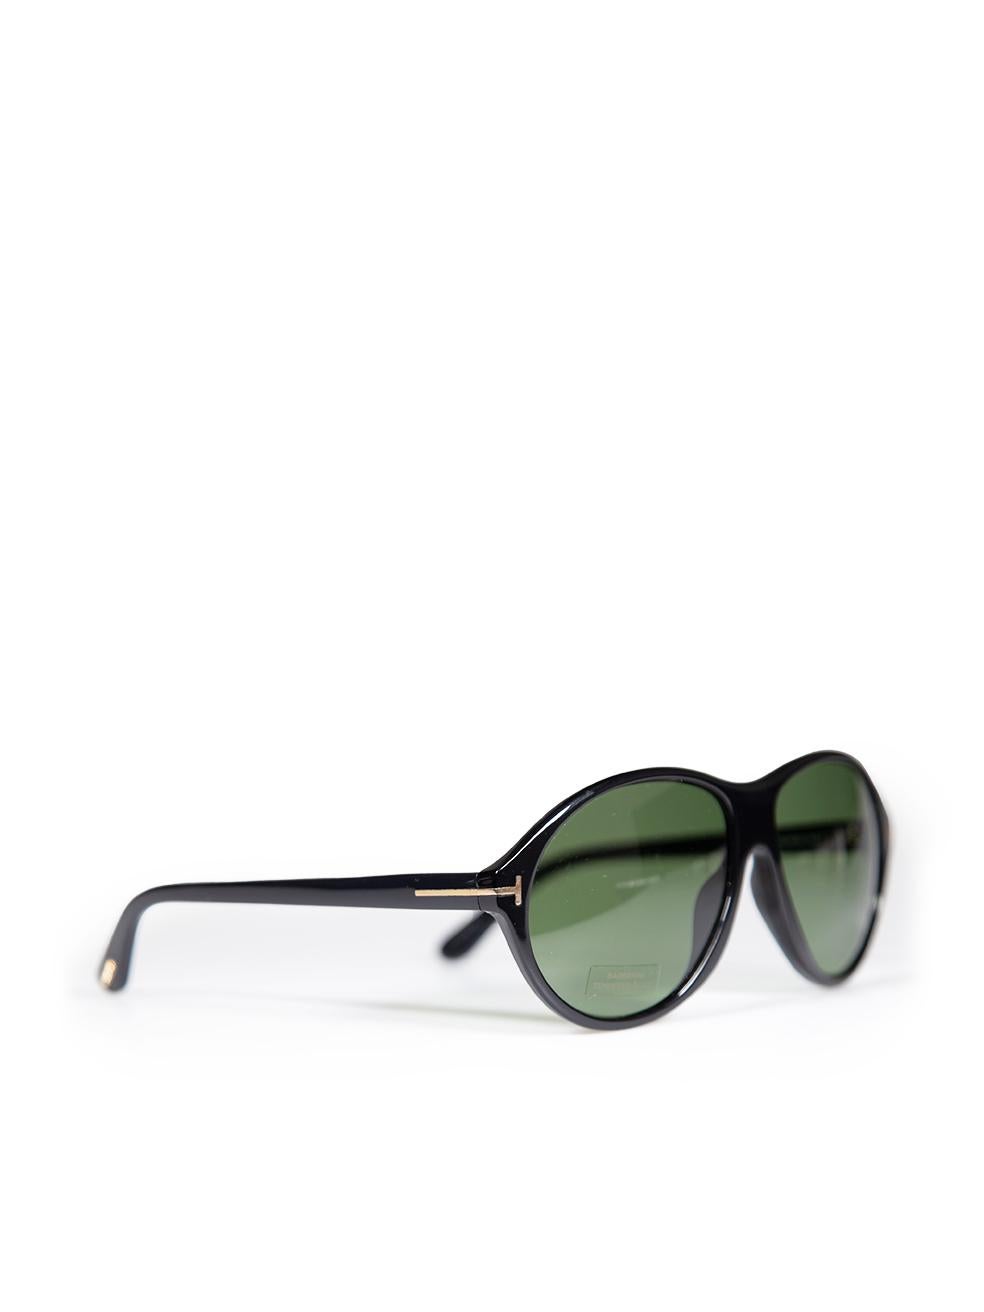 Tom Ford Green Round Tyler Sunglasses In New Condition For Sale In London, GB